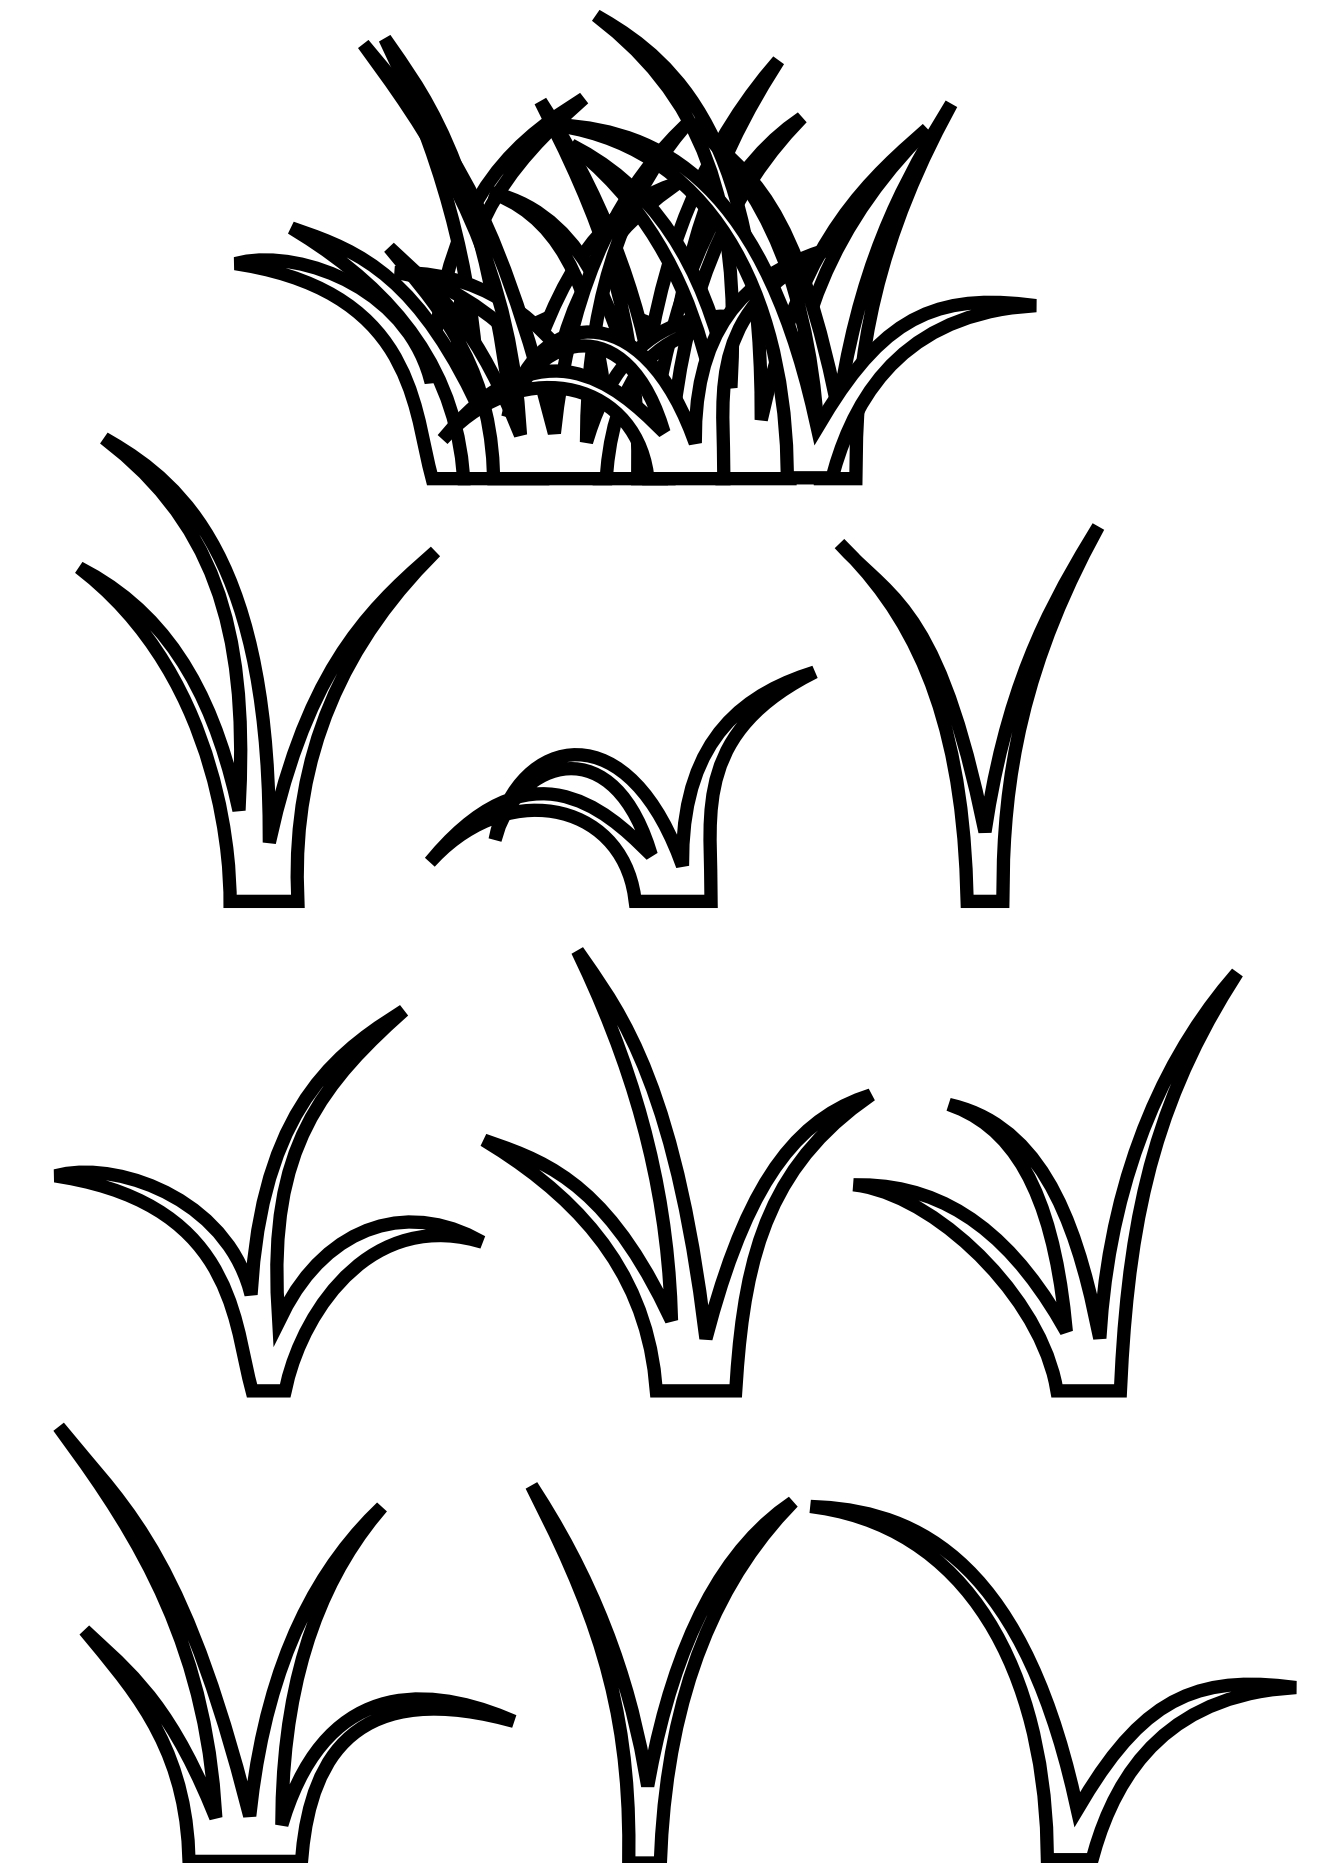  collection of black. Clipart grass drawing